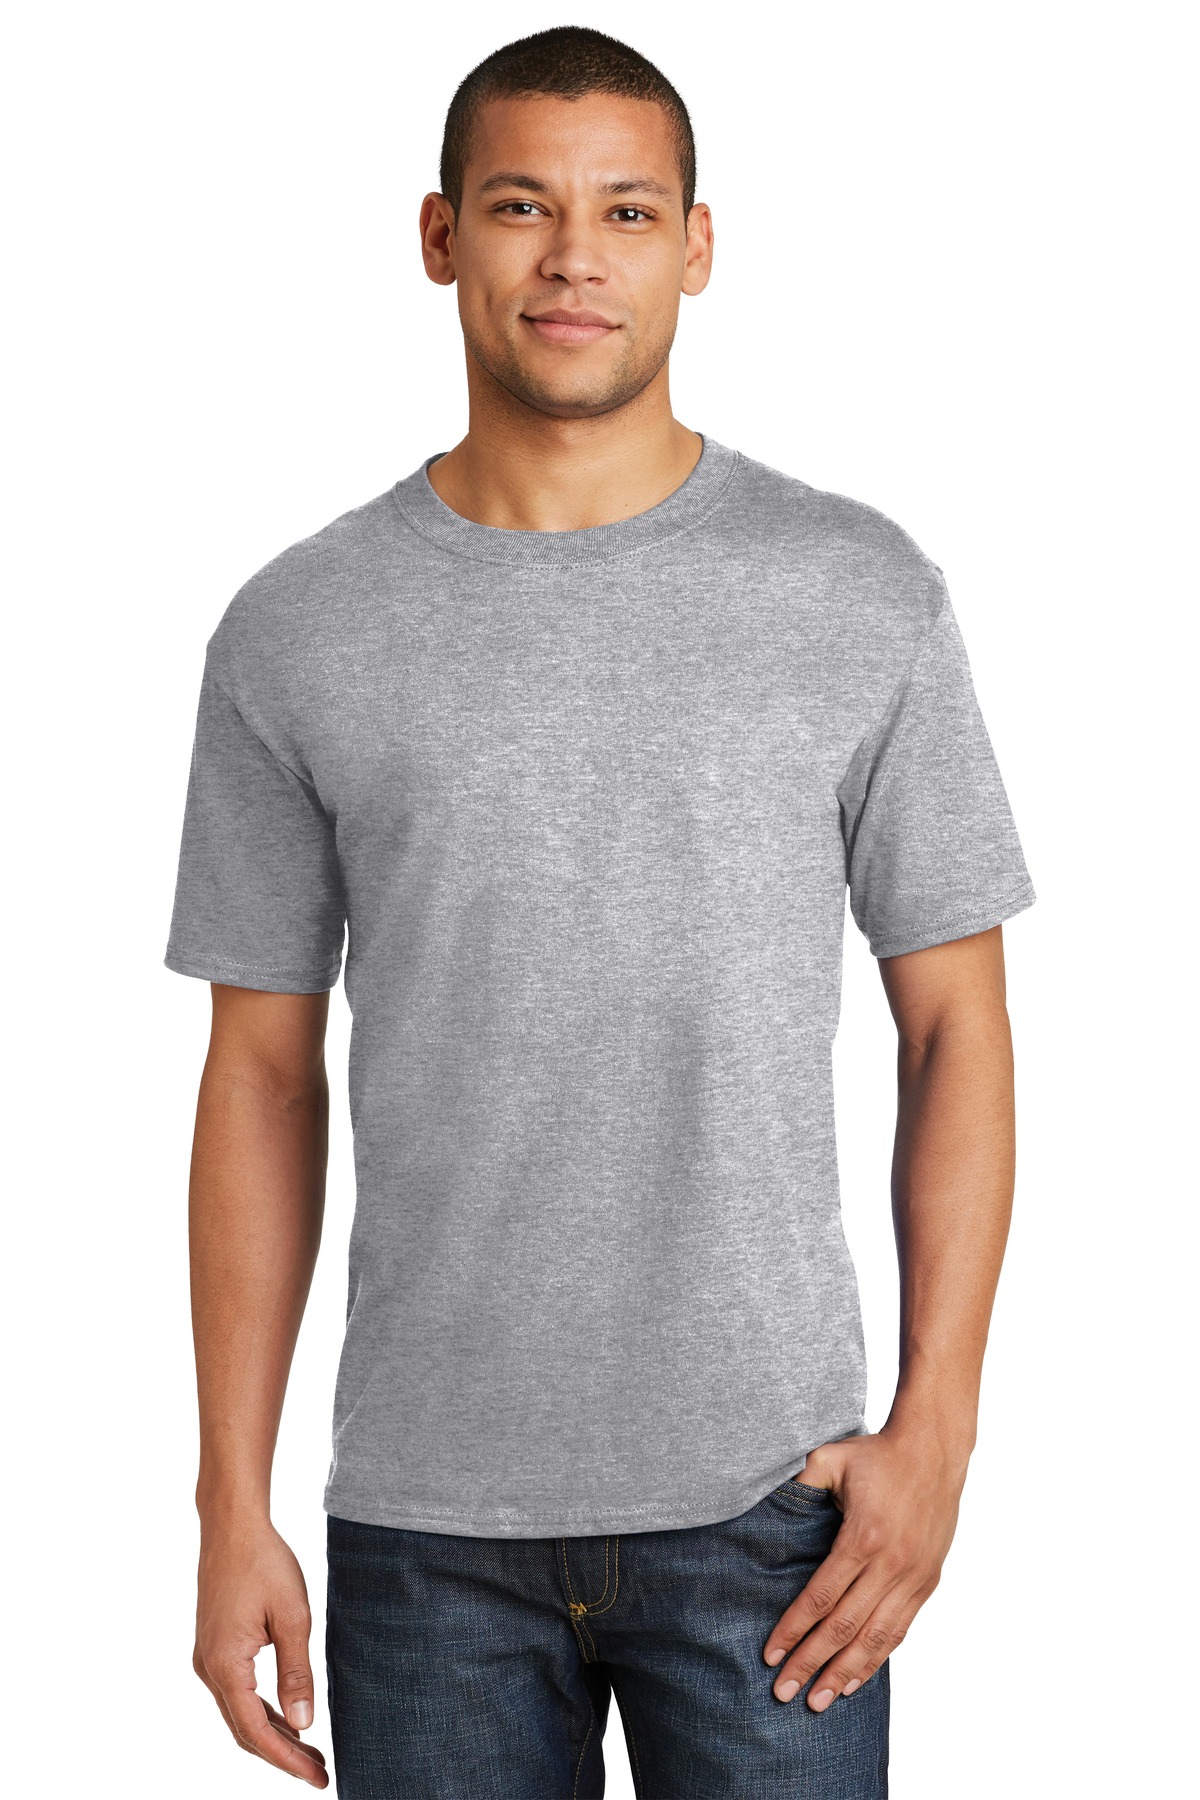 Hanes Beefy-T 100% Cotton T-Shirt.  5180